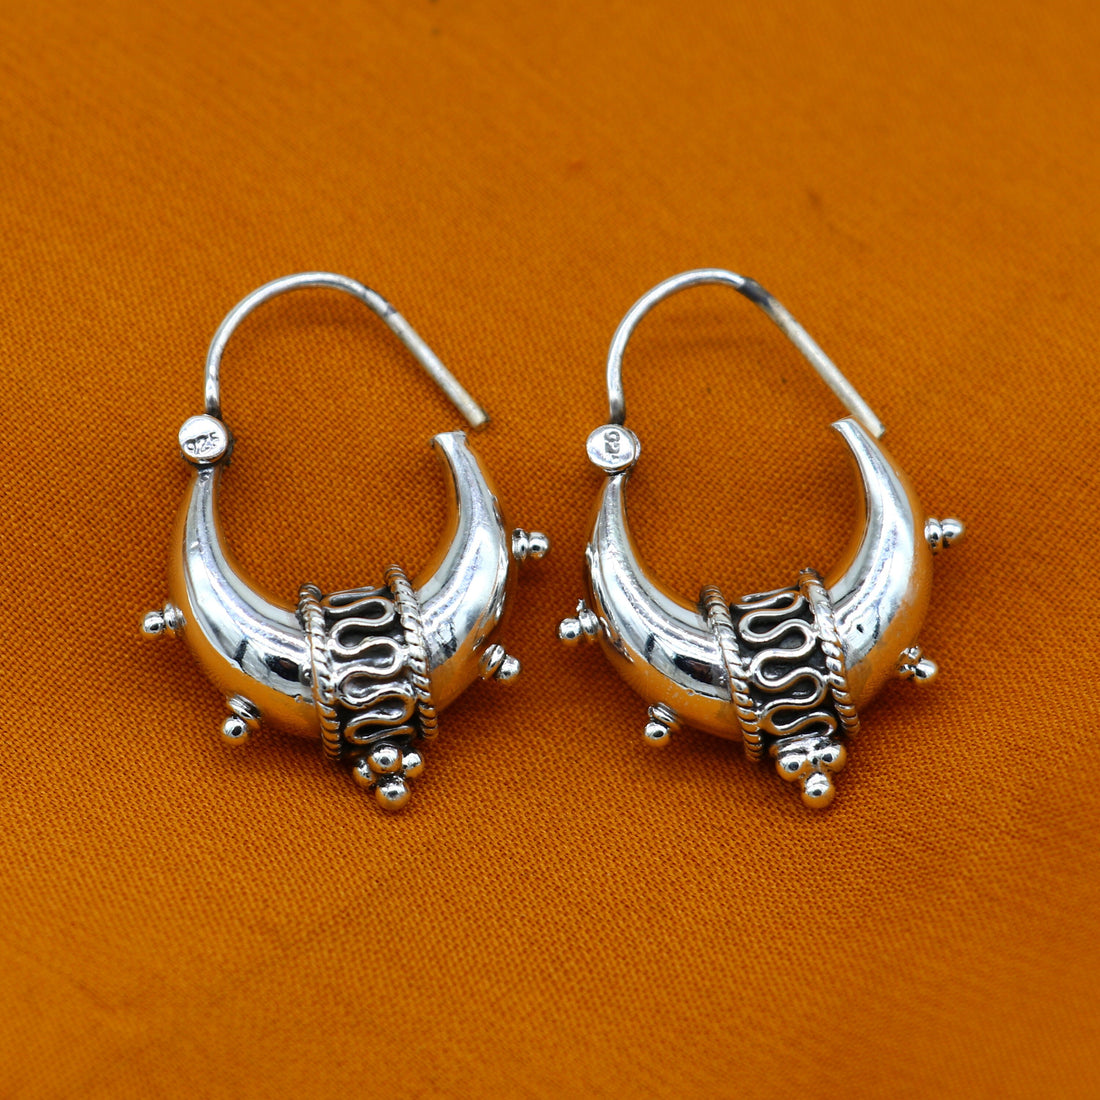 925 sterling silver plain shiny traditional cultural design elegant hoops earrings kundal tribal belly dance brides dainty jewelry s1157 - TRIBAL ORNAMENTS